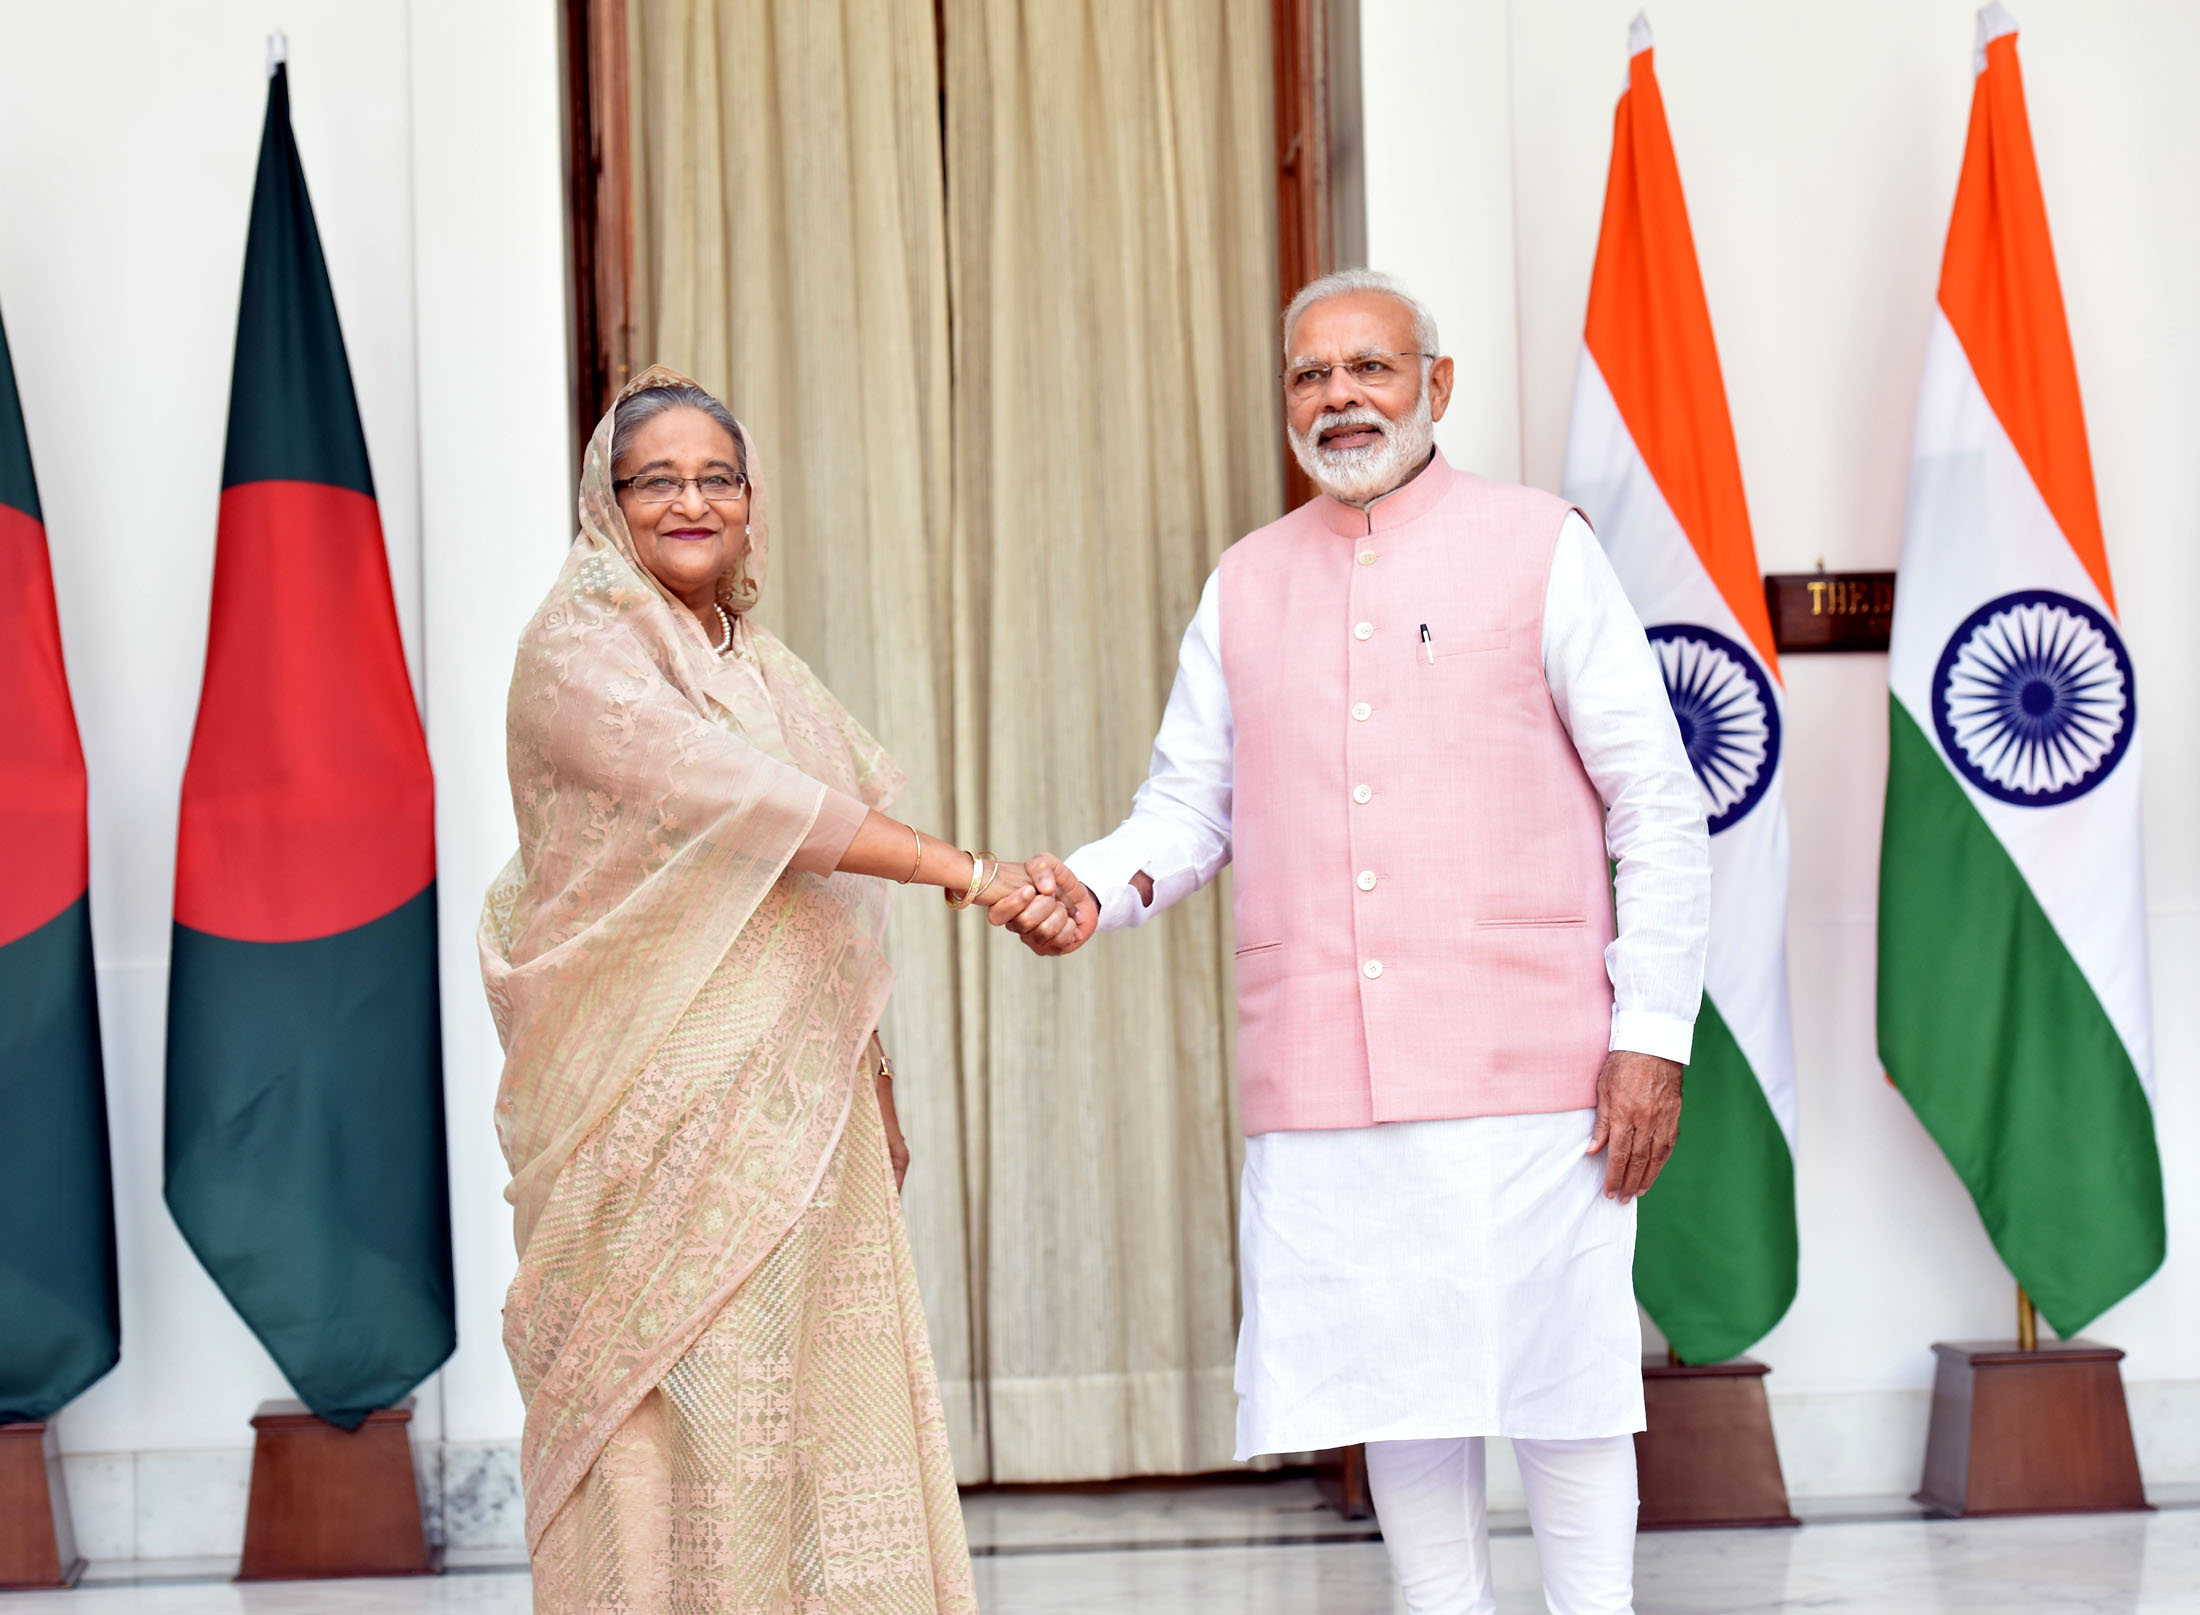 The Prime Minister, Shri Narendra Modi with the Prime Minister of Bangladesh, Ms. Sheikh Hasina, at Hyderabad House, in New Delhi on April 08, 2017.